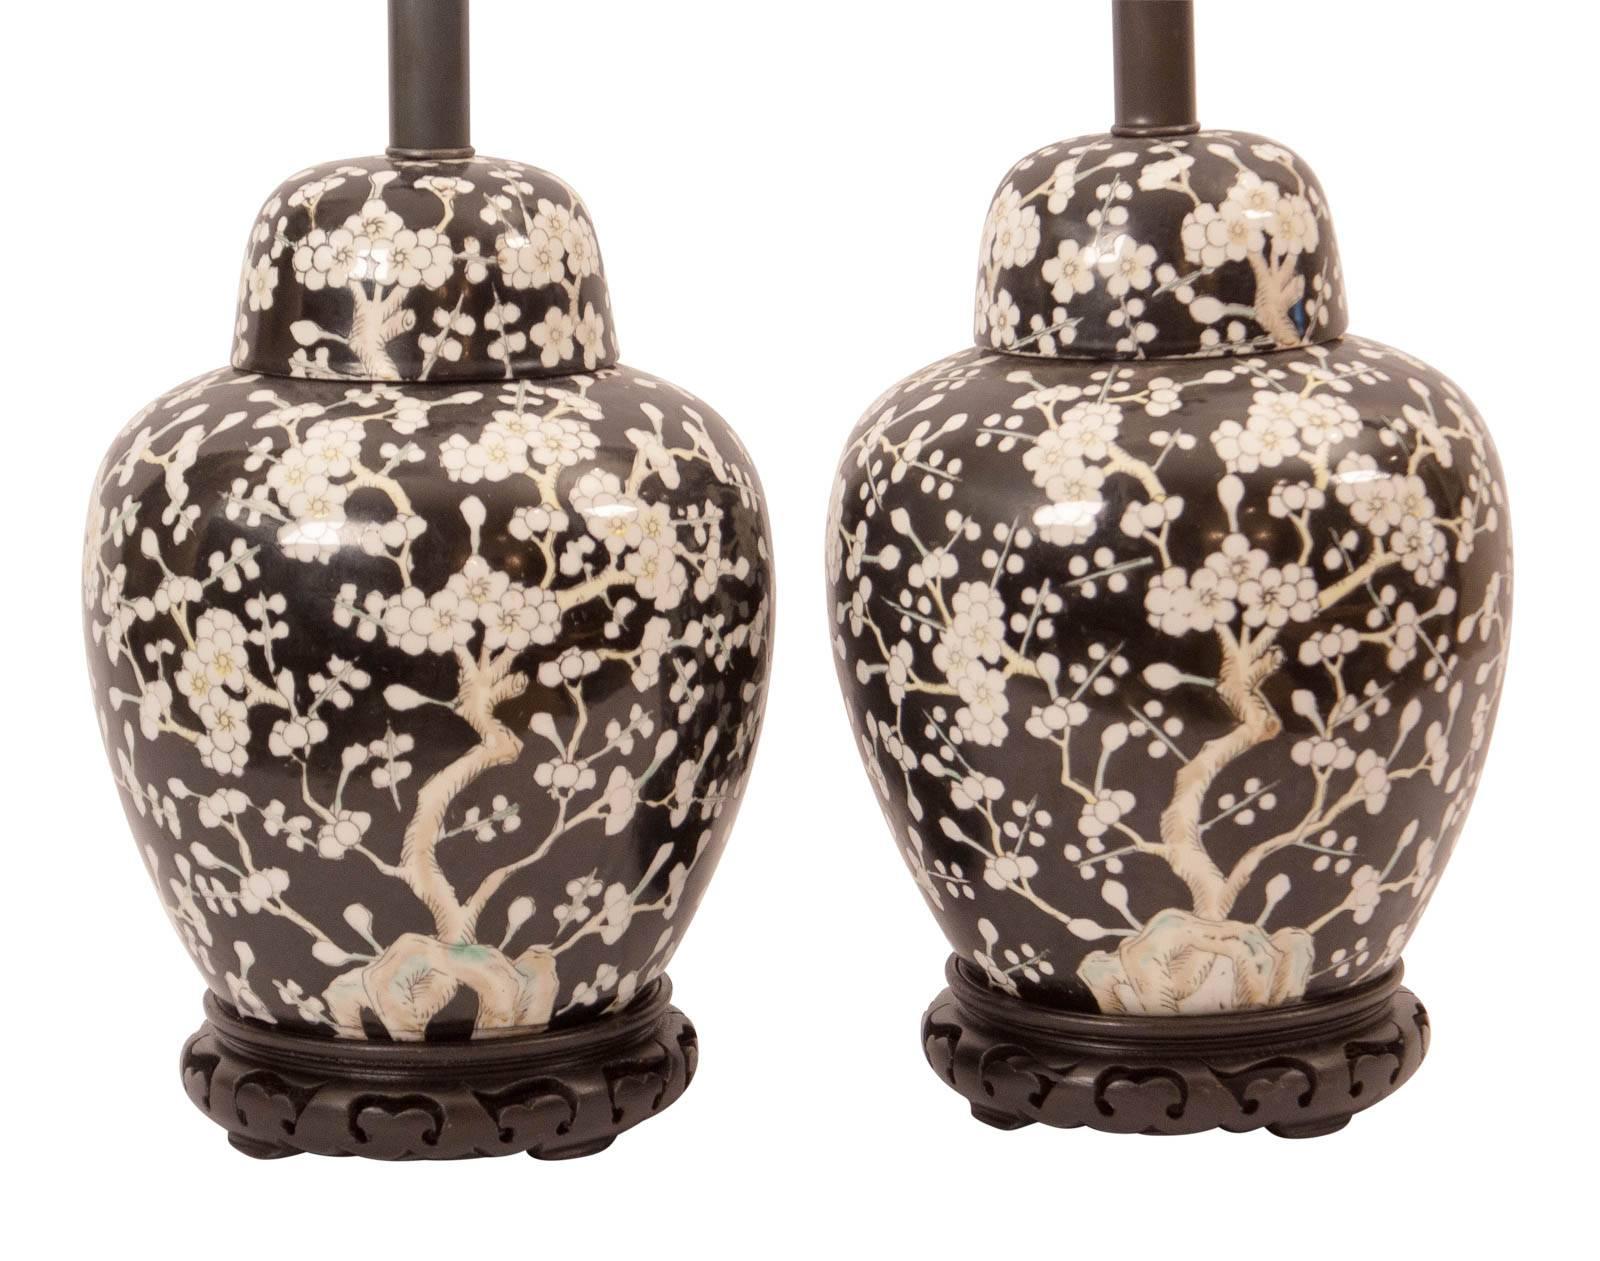 Pair of ginger jars with covers painted with flowering prunus on a black ground. Mounted as lamps on a carved wood base with new wiring, China, circa 1960.